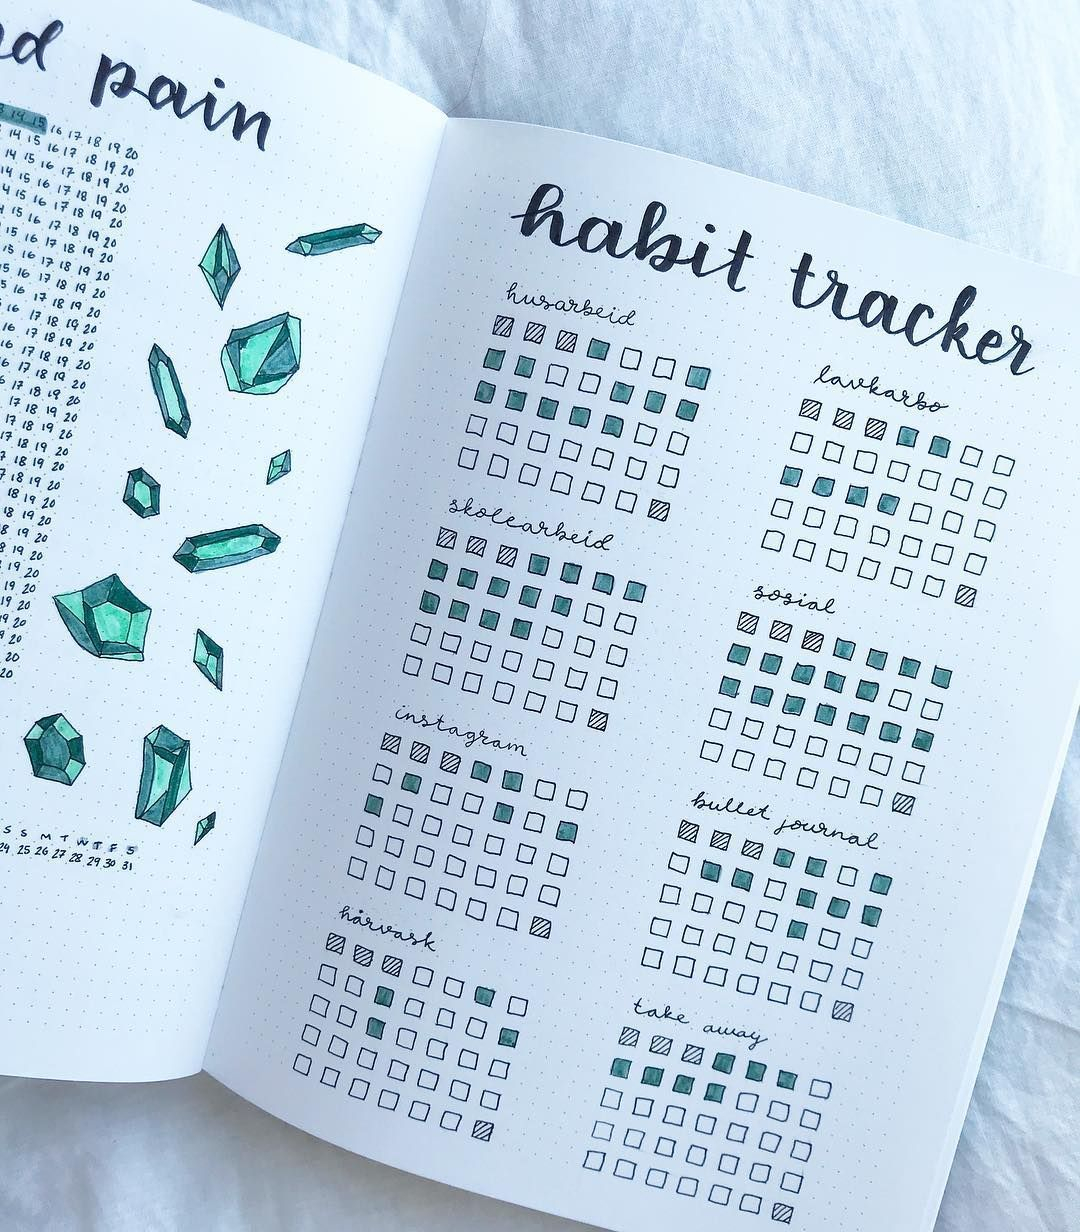 The Best Way To Change A Habit Is To Track Your Habits This Can Be